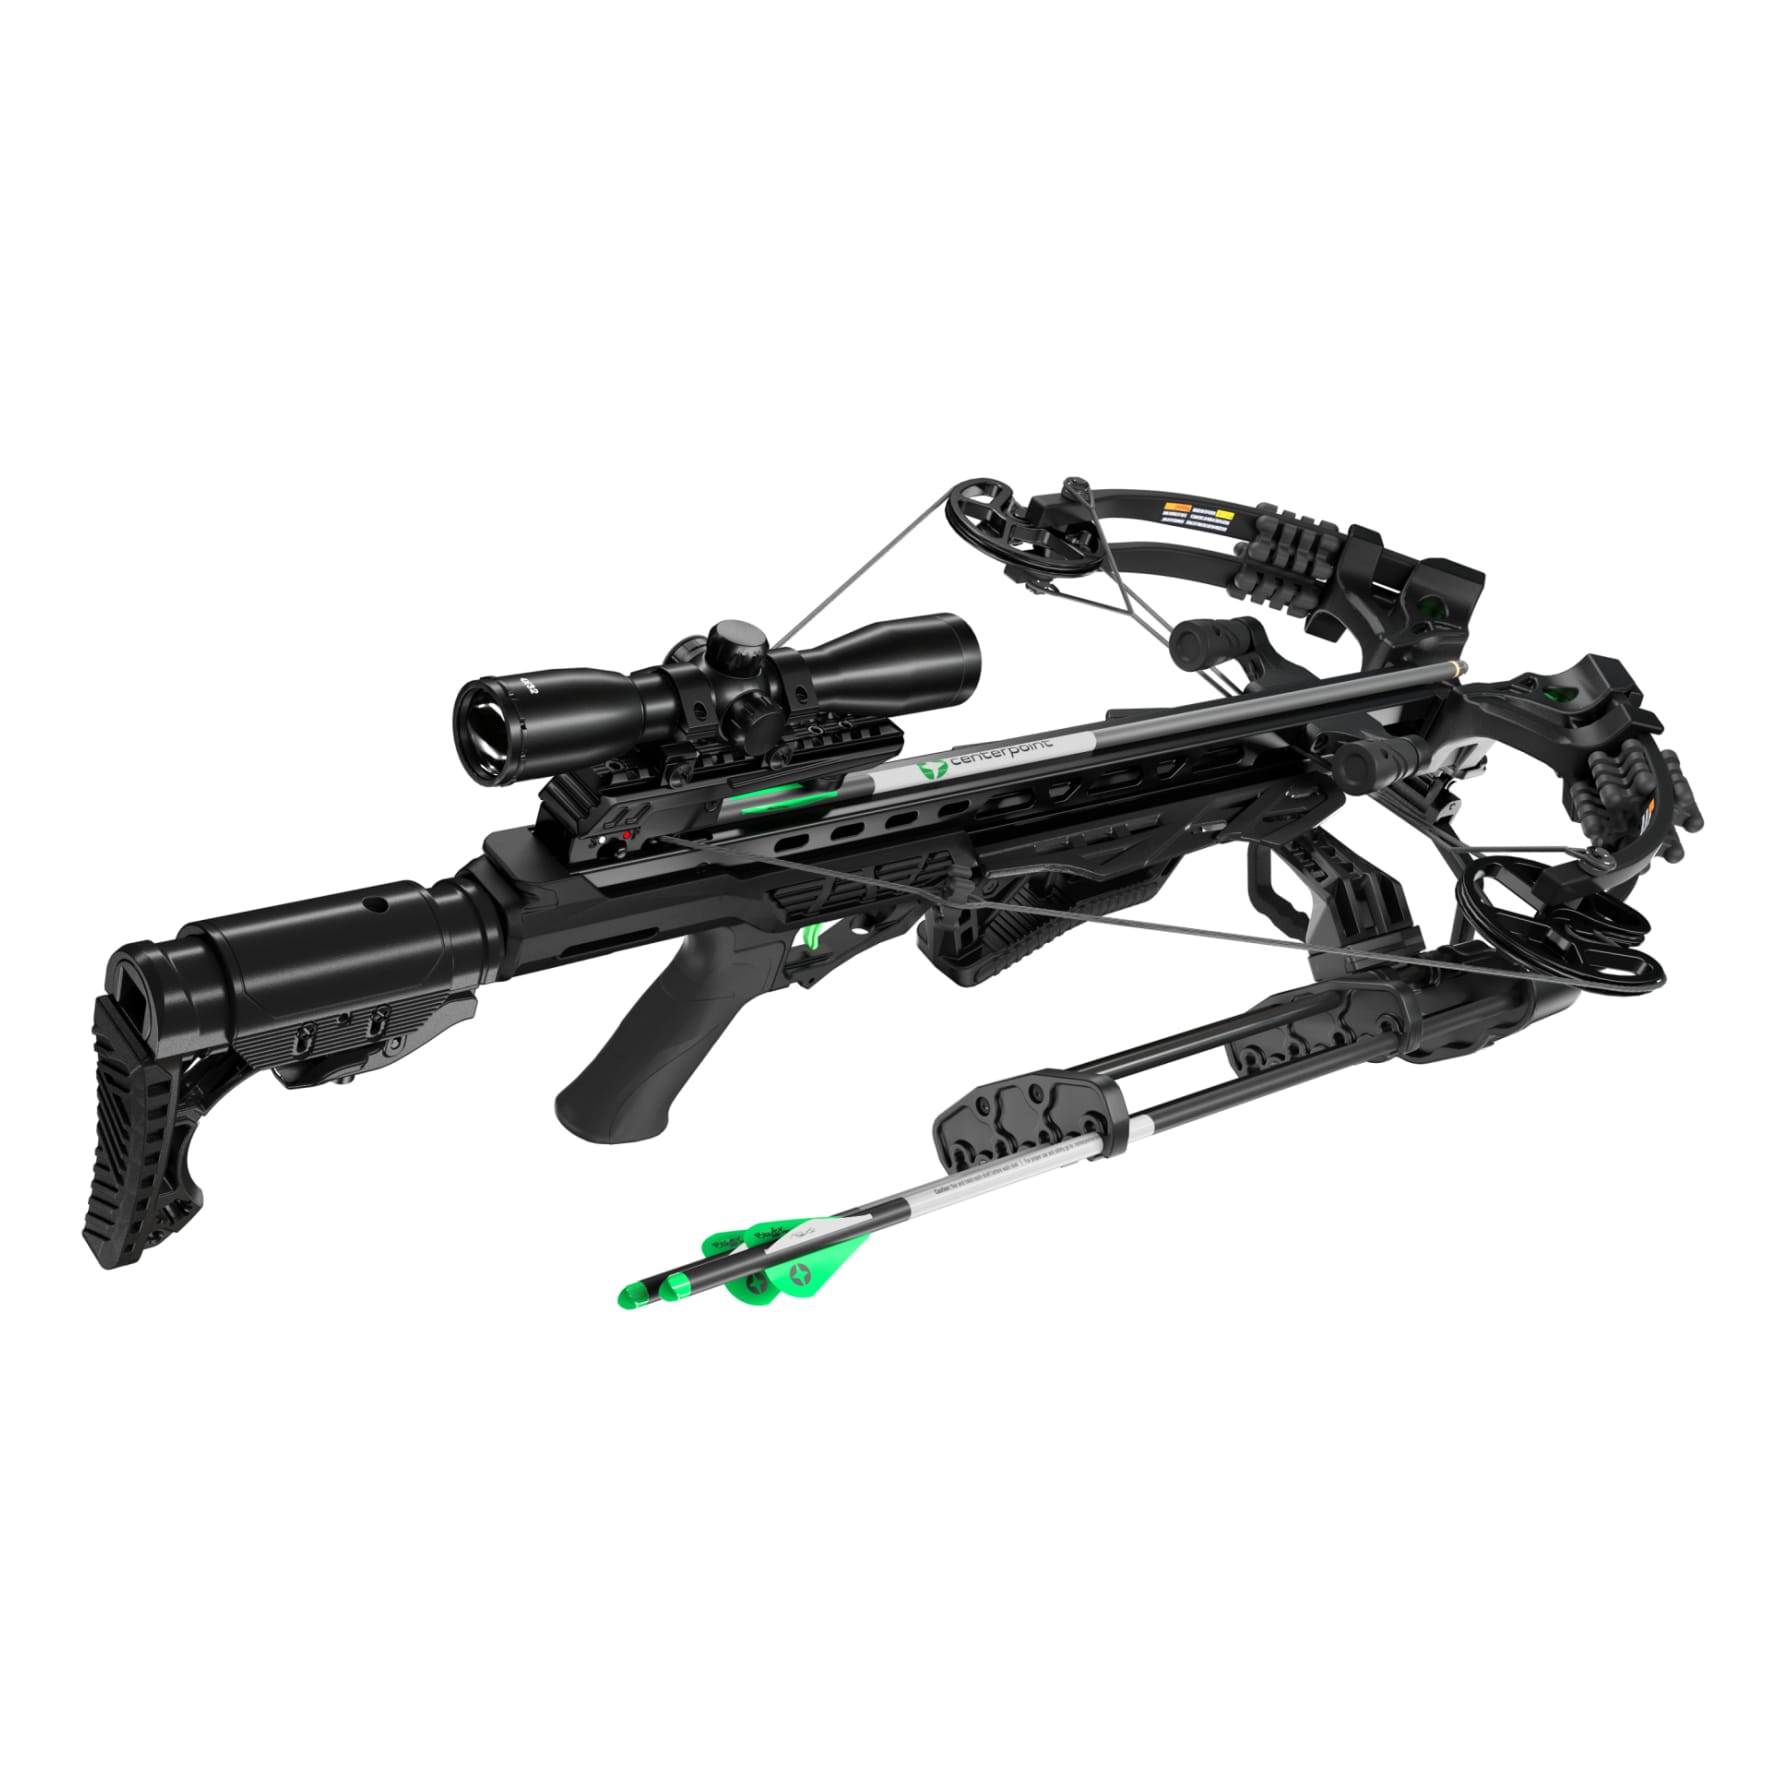 CenterPoint® Amped™ 425 Compound Crossbow With Silent Crank